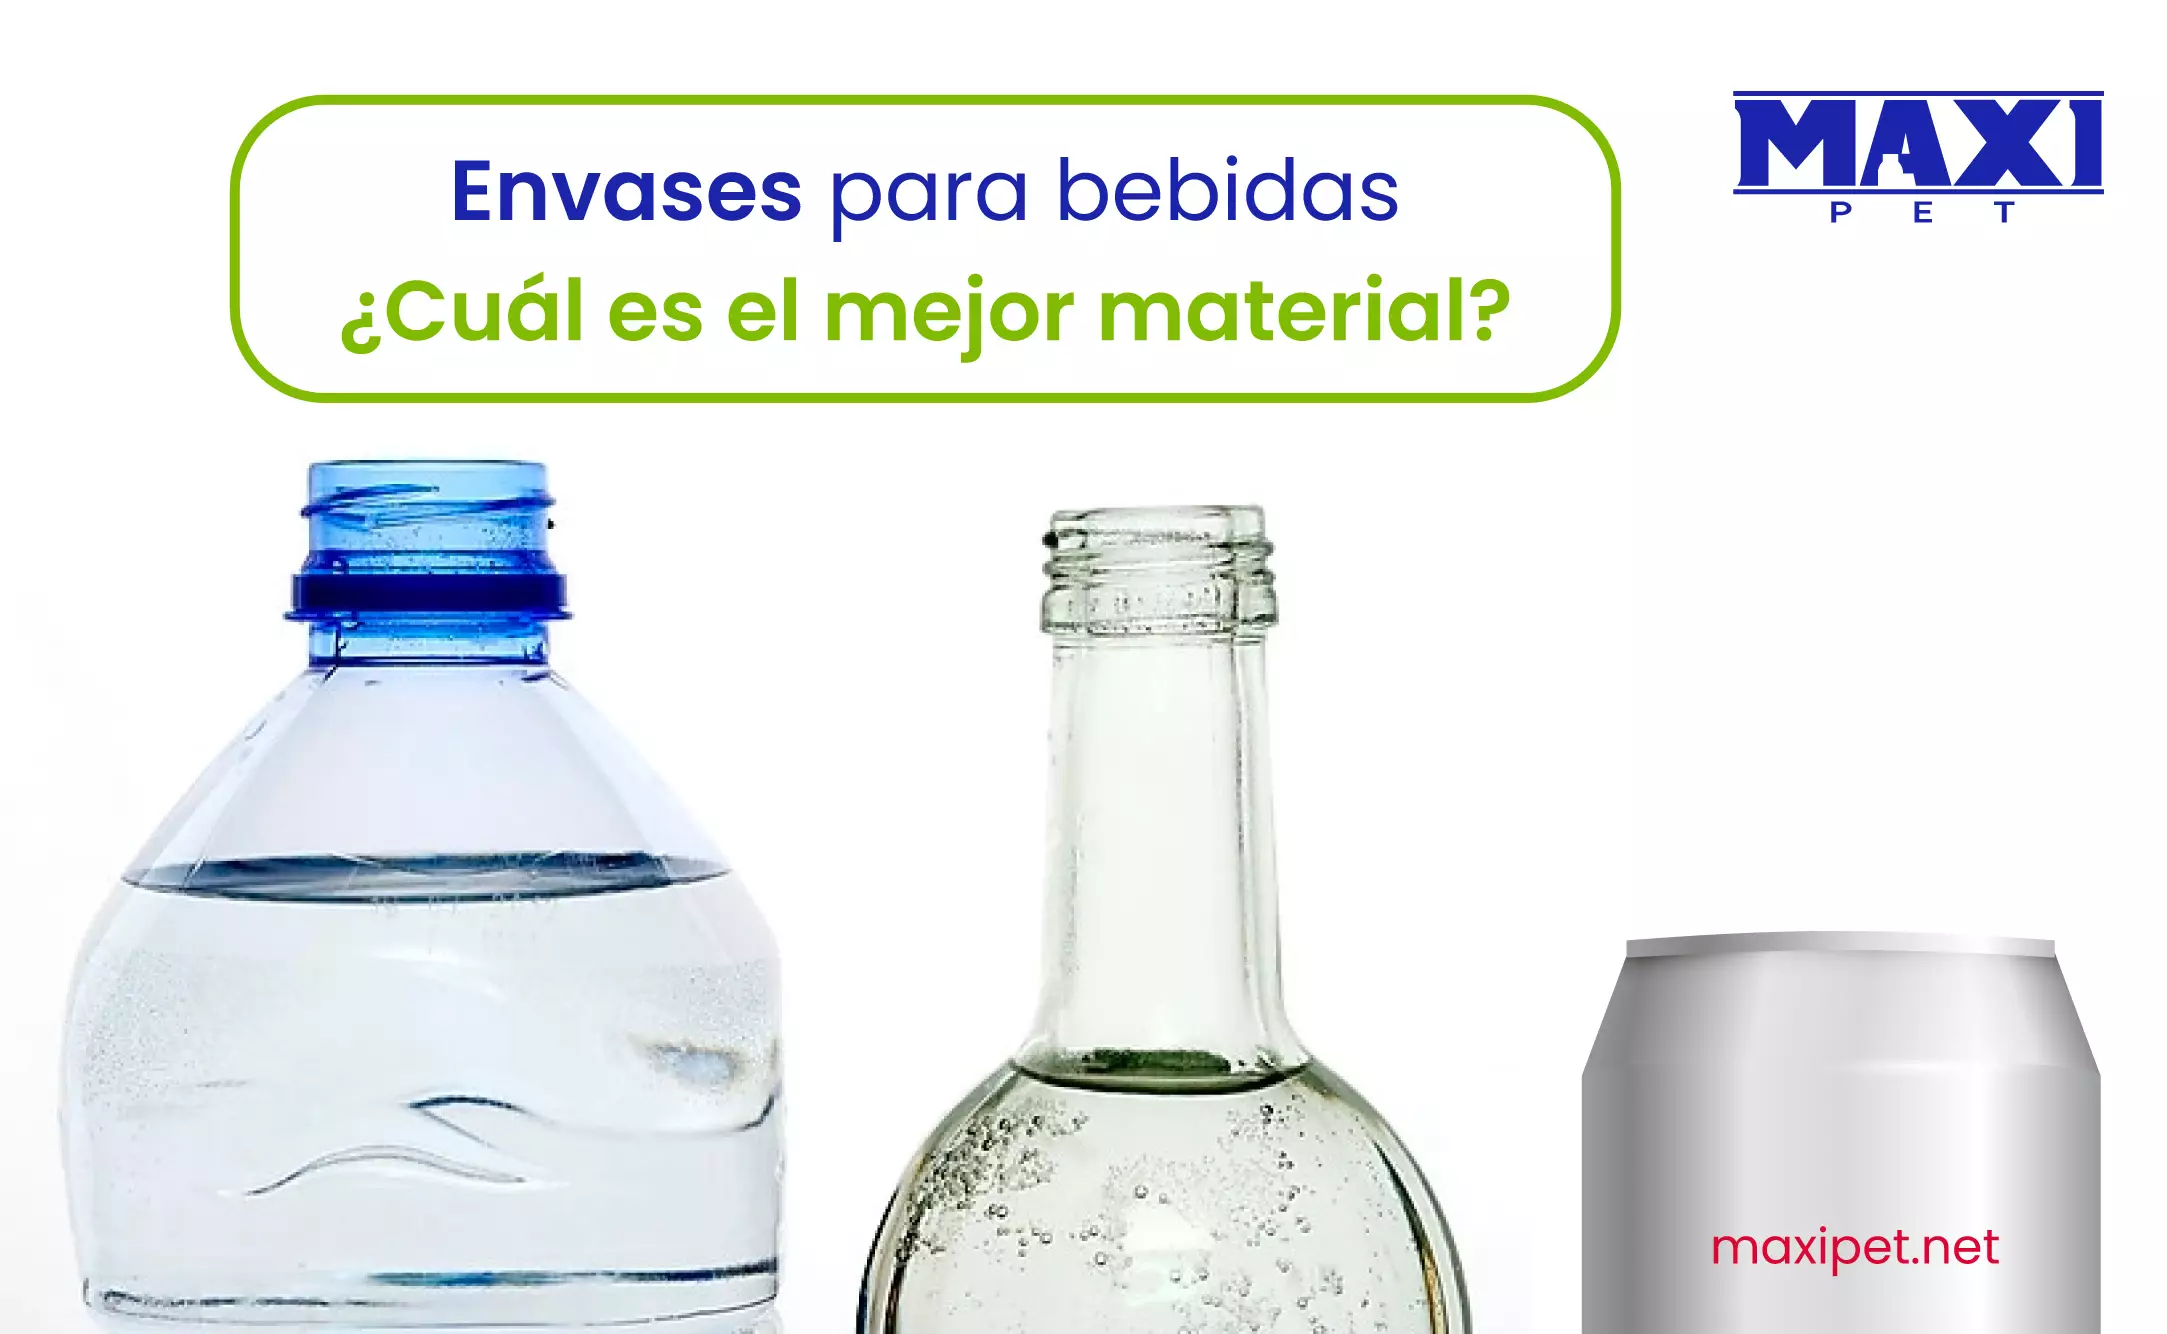 Beverage containers: which one is the best material?